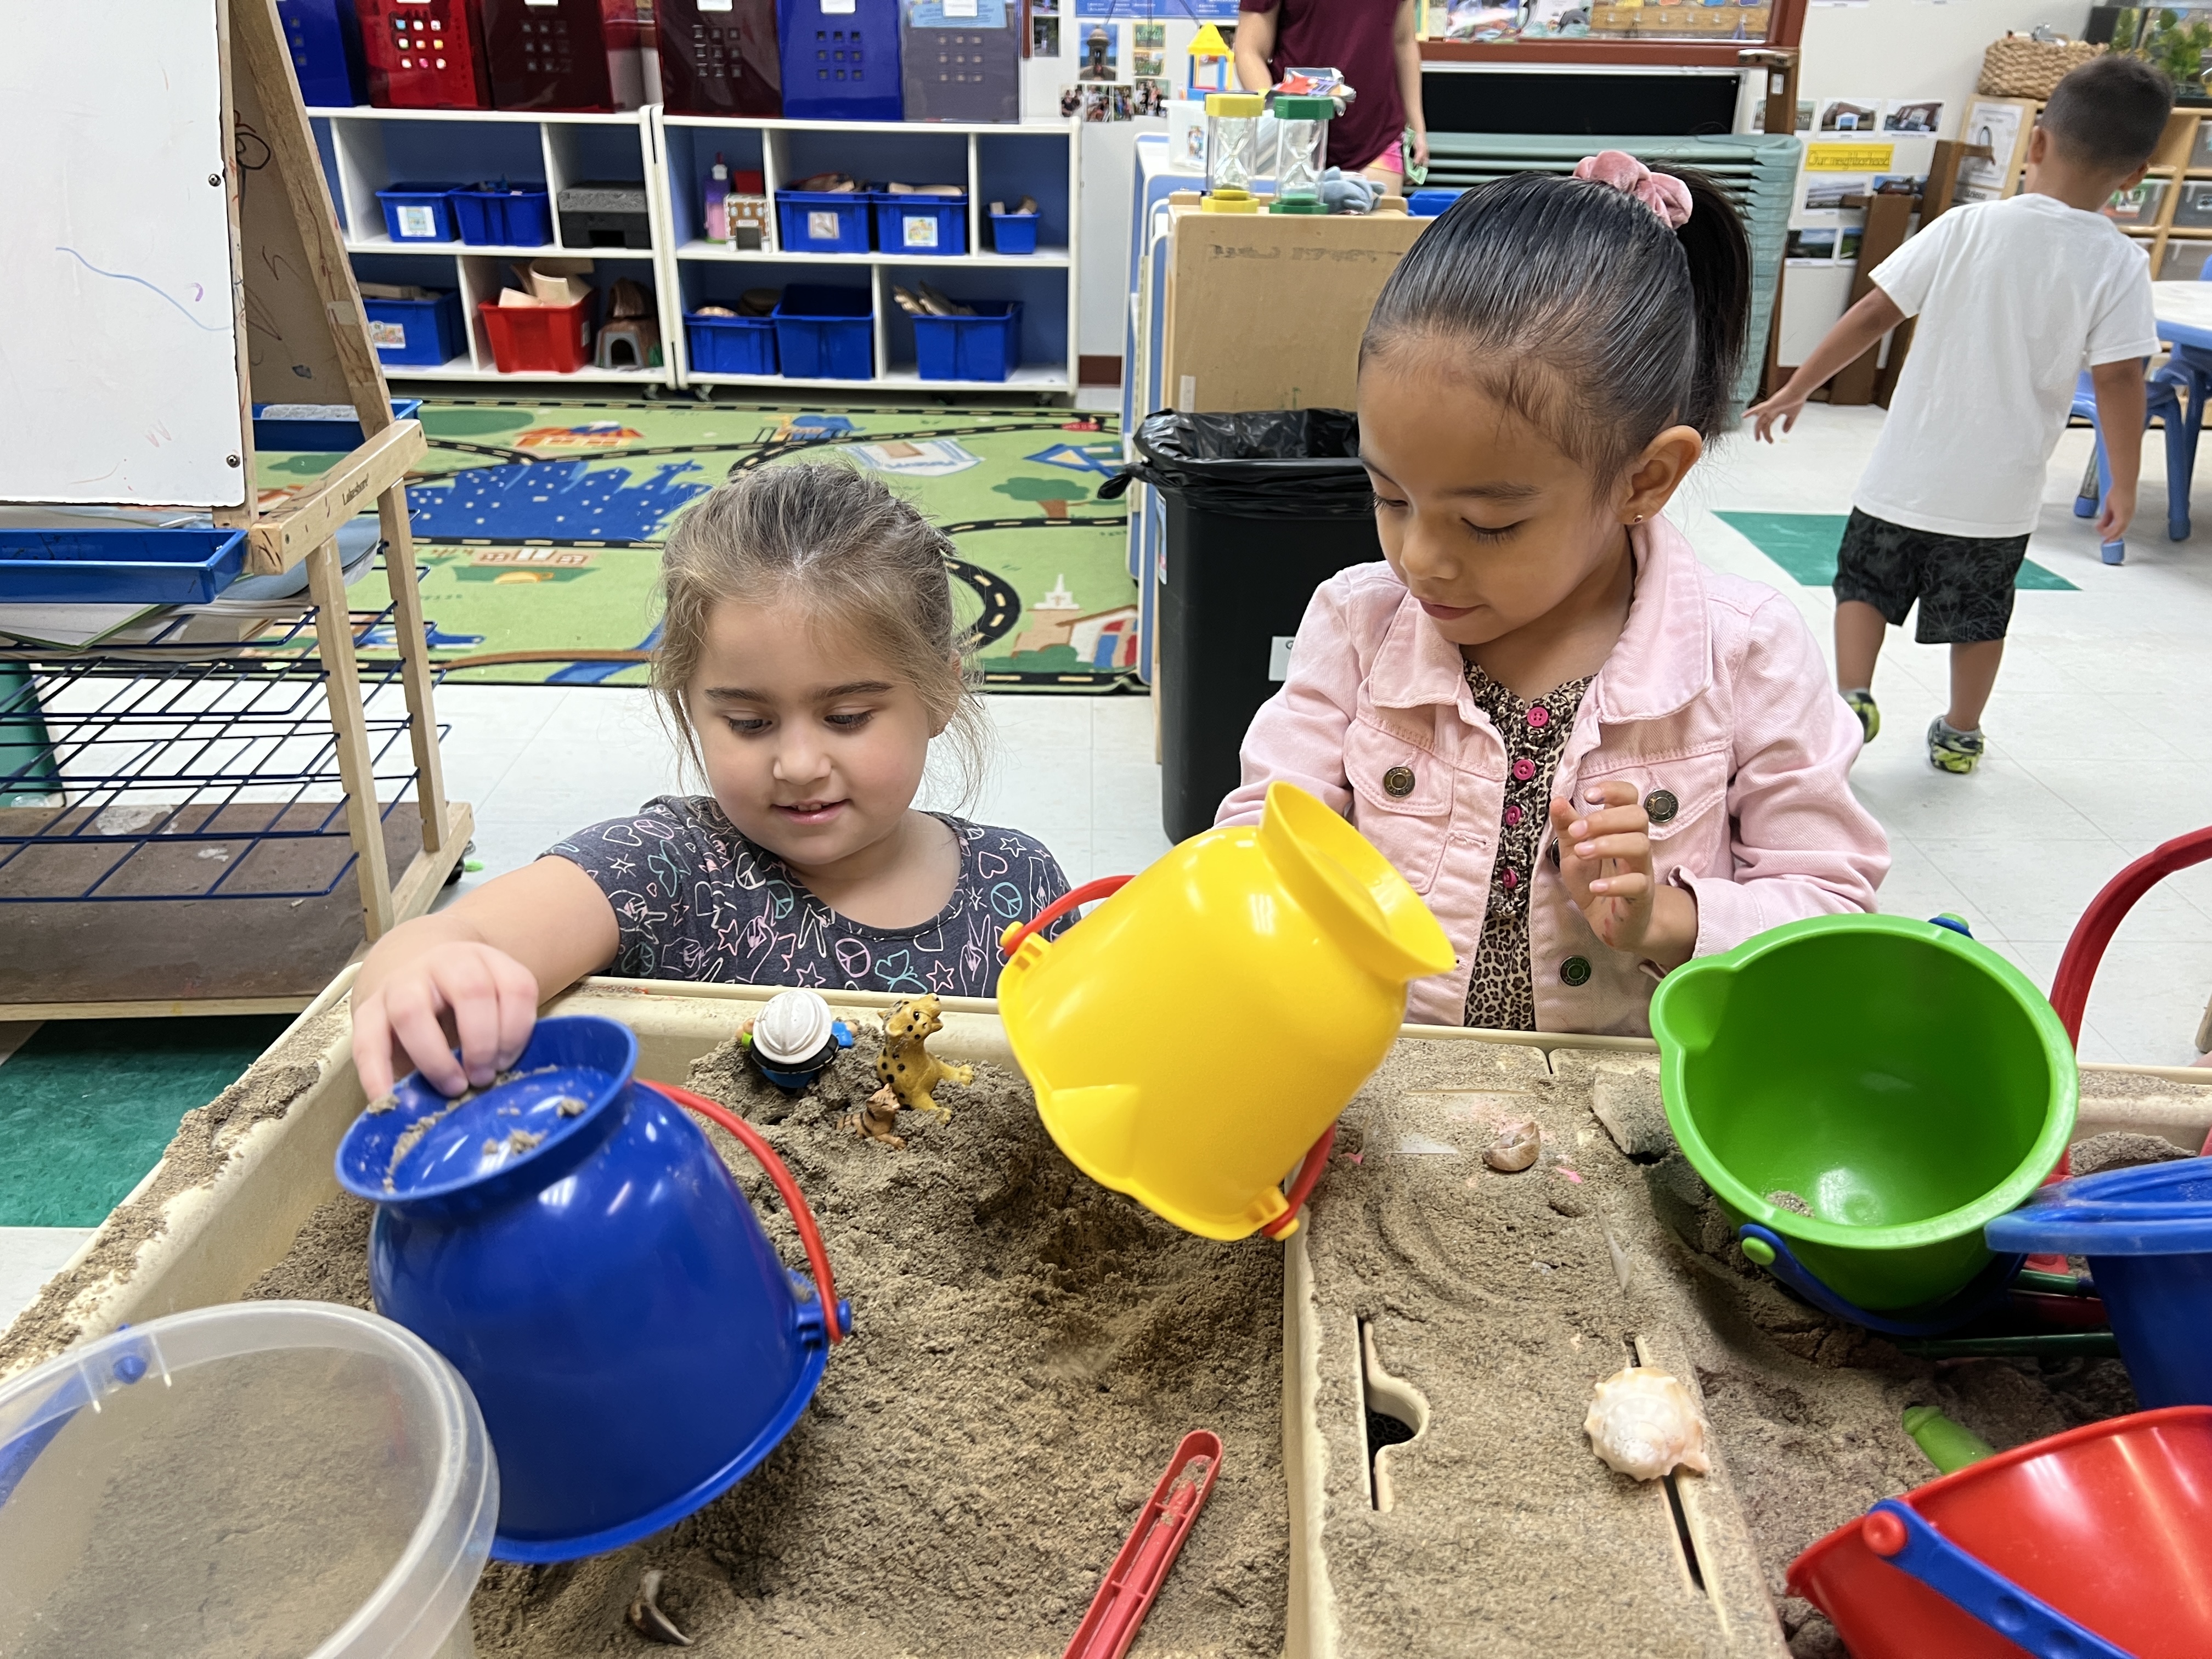 Two preschool students playing together at sand table